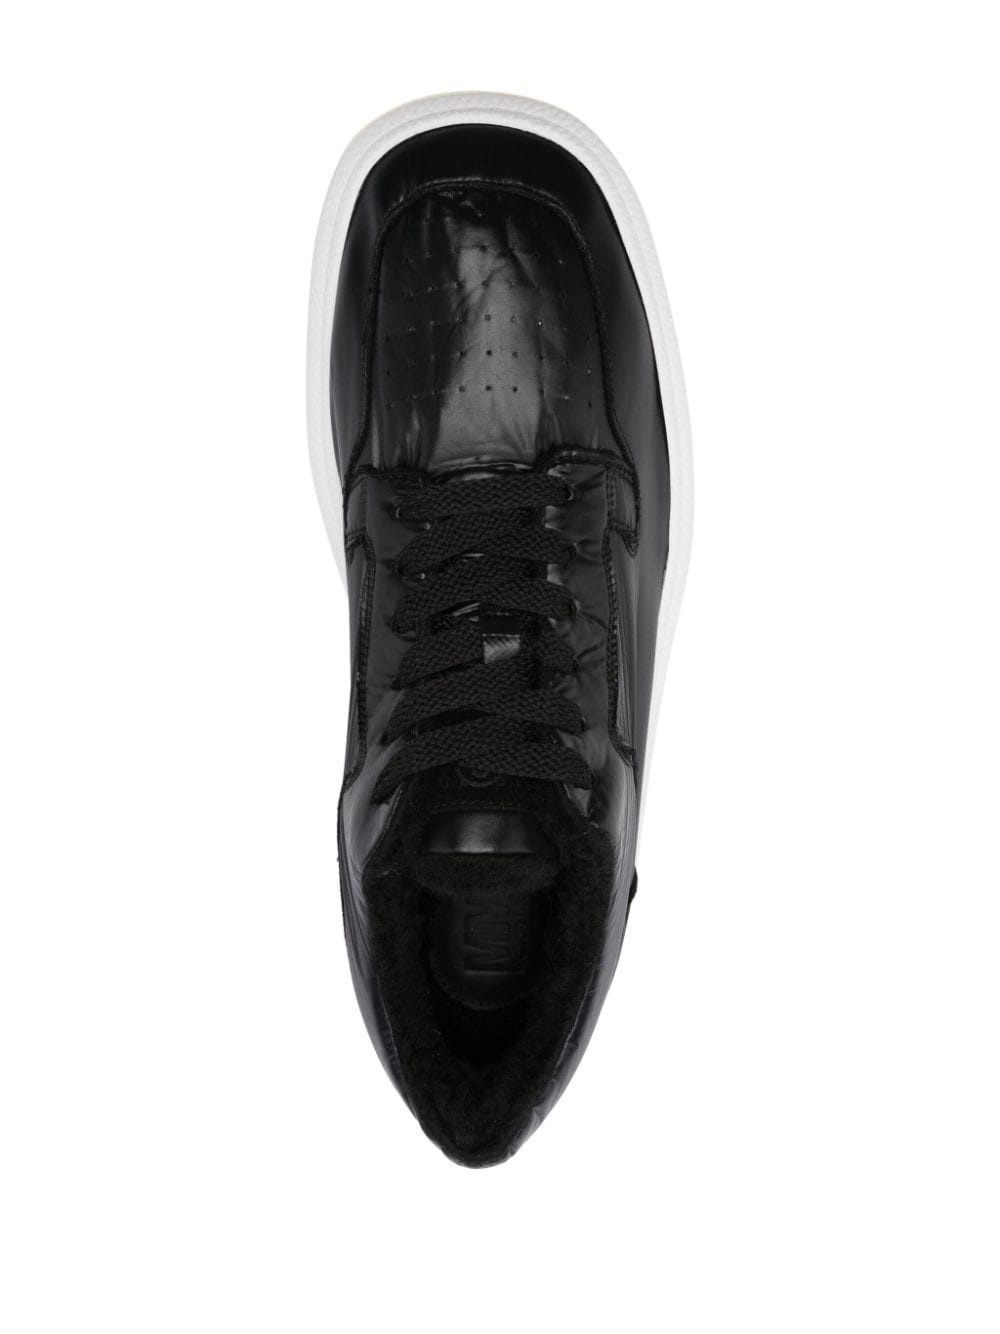 shearling-lining patent leather sneakers - 4